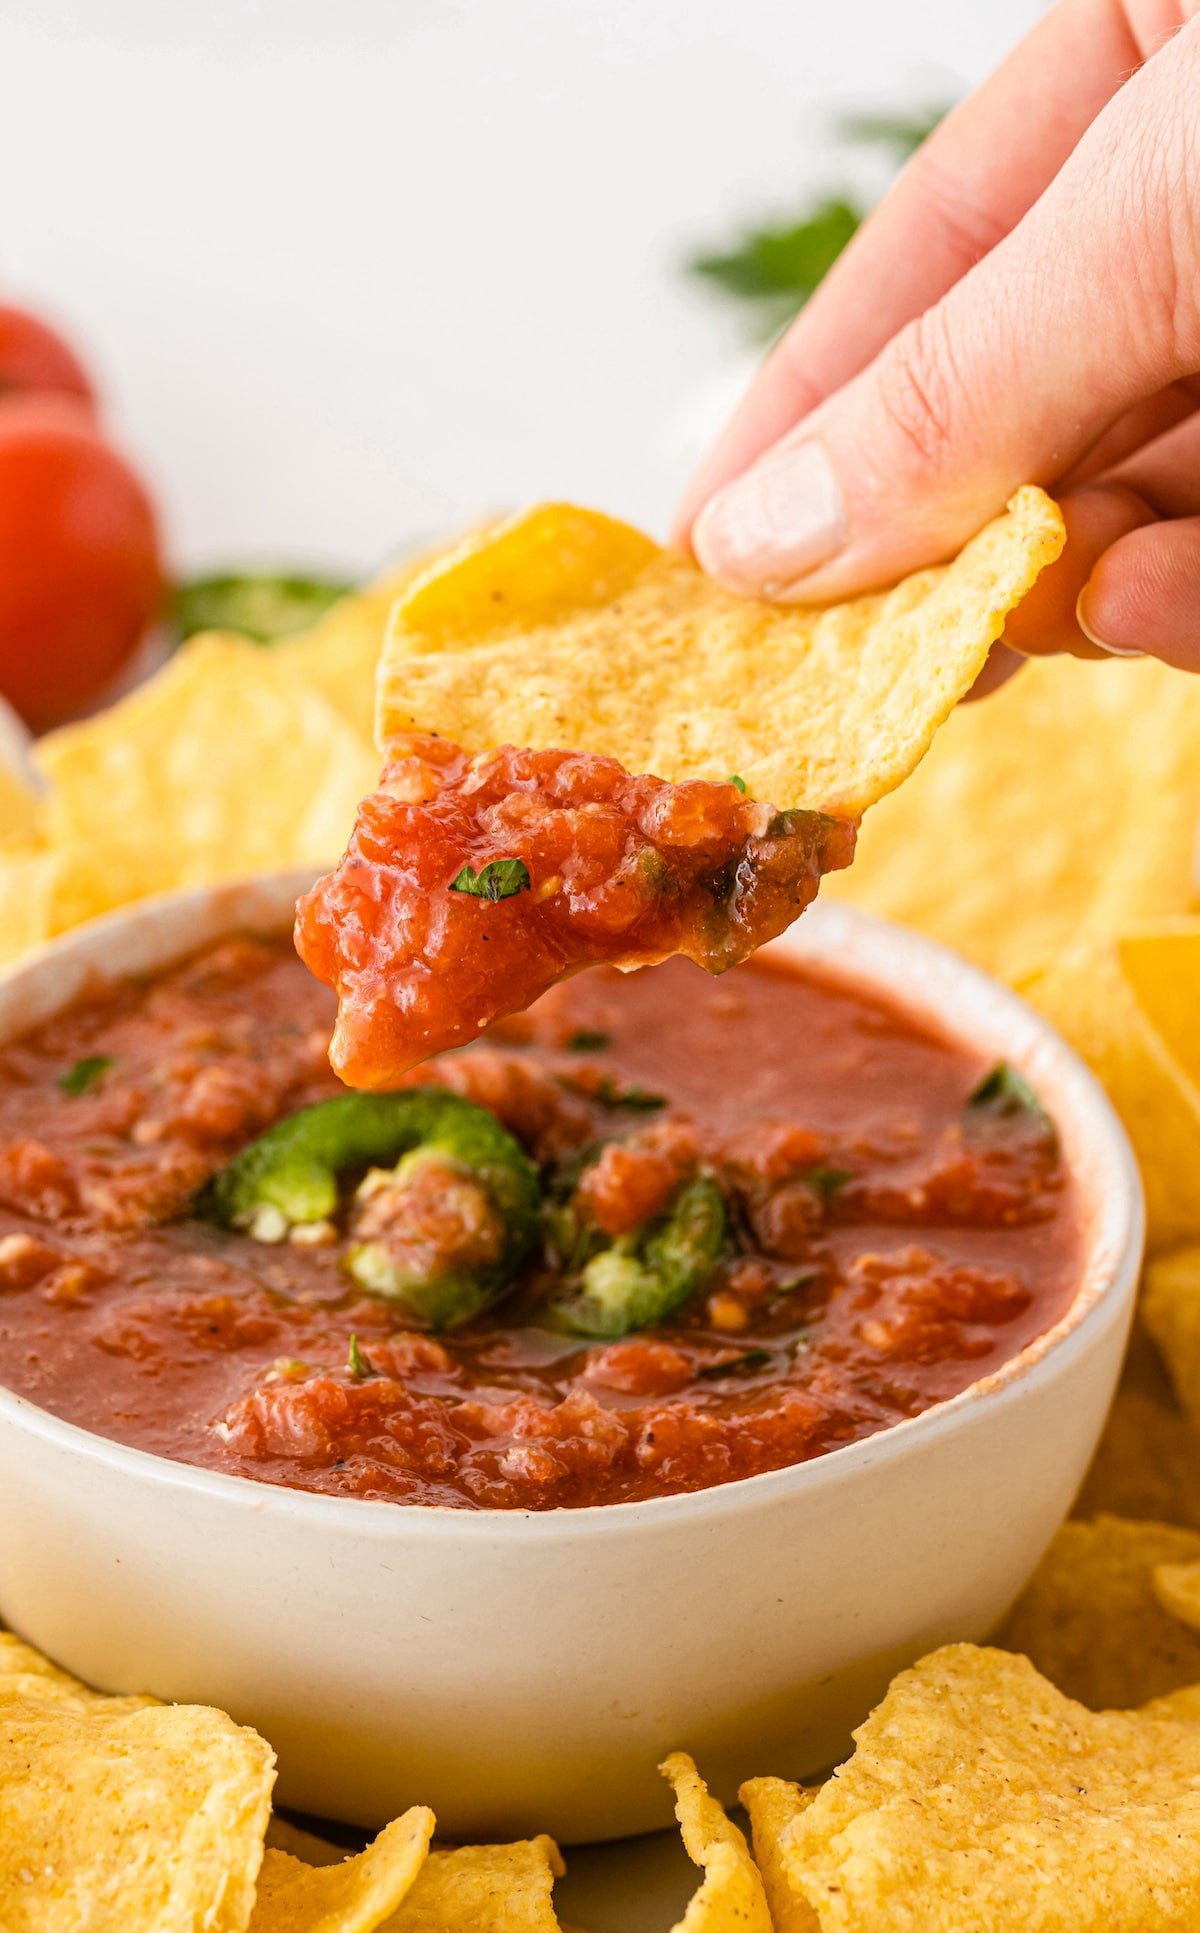 Chip being dipped into a bowl of easy salsa